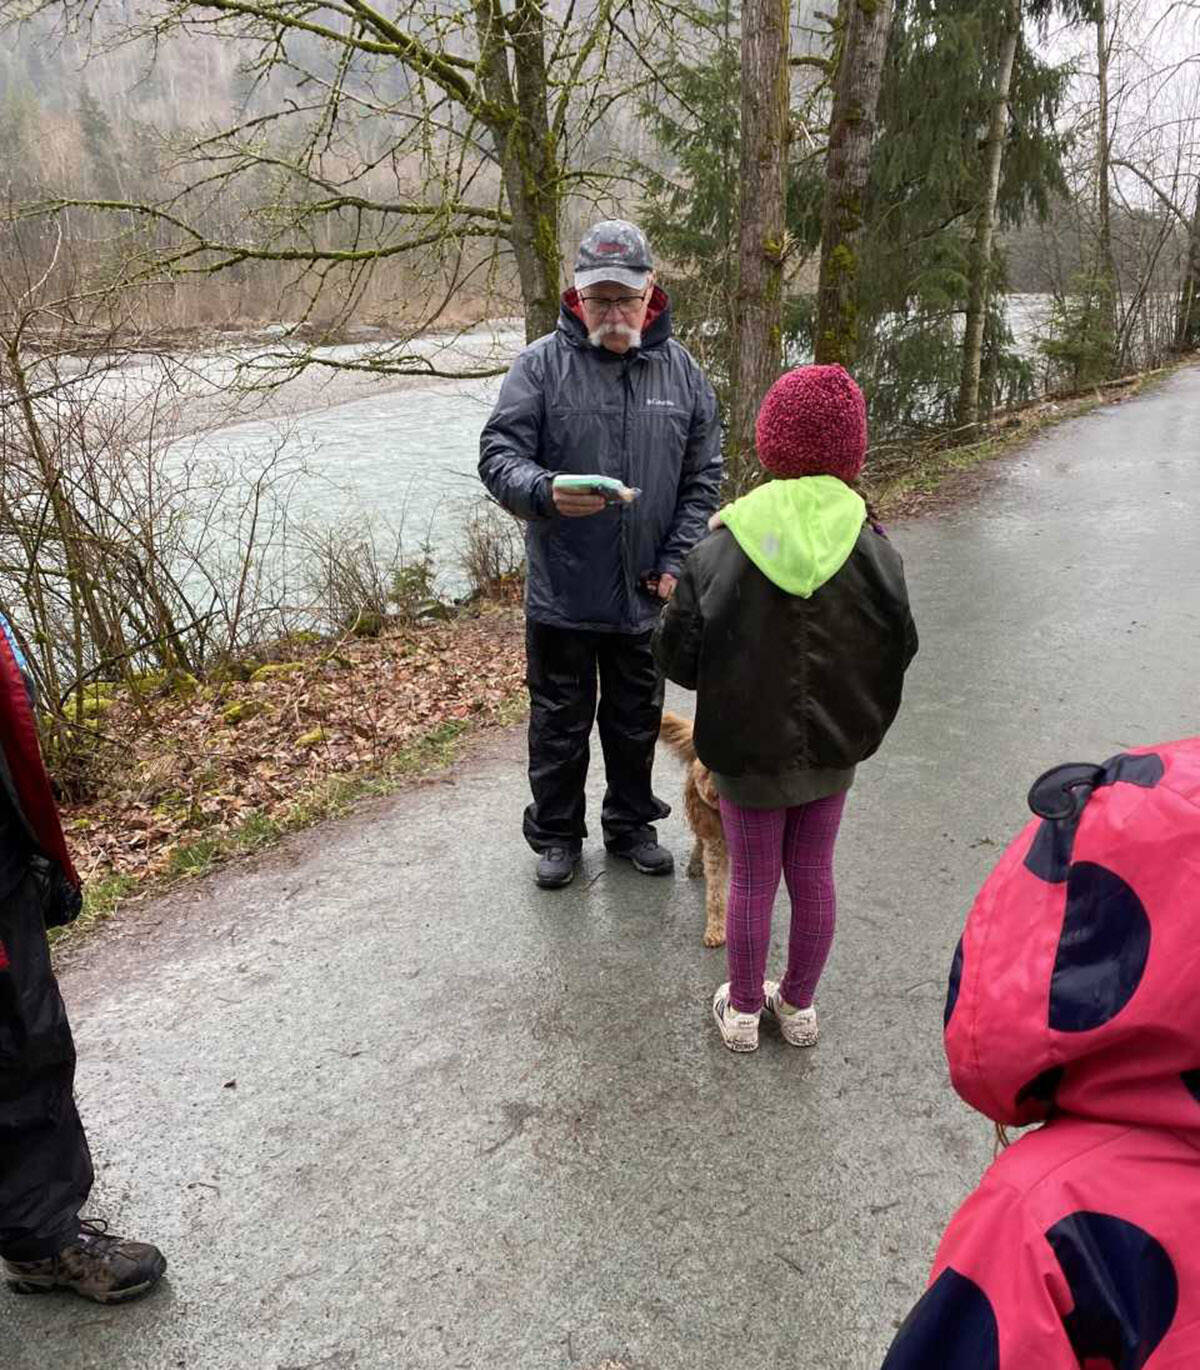 Grade 3 students from Watson Elementary were out at Vedder Park on Thursday, March 17, 2022 doing their kindness project. (Shelley Burke photo)